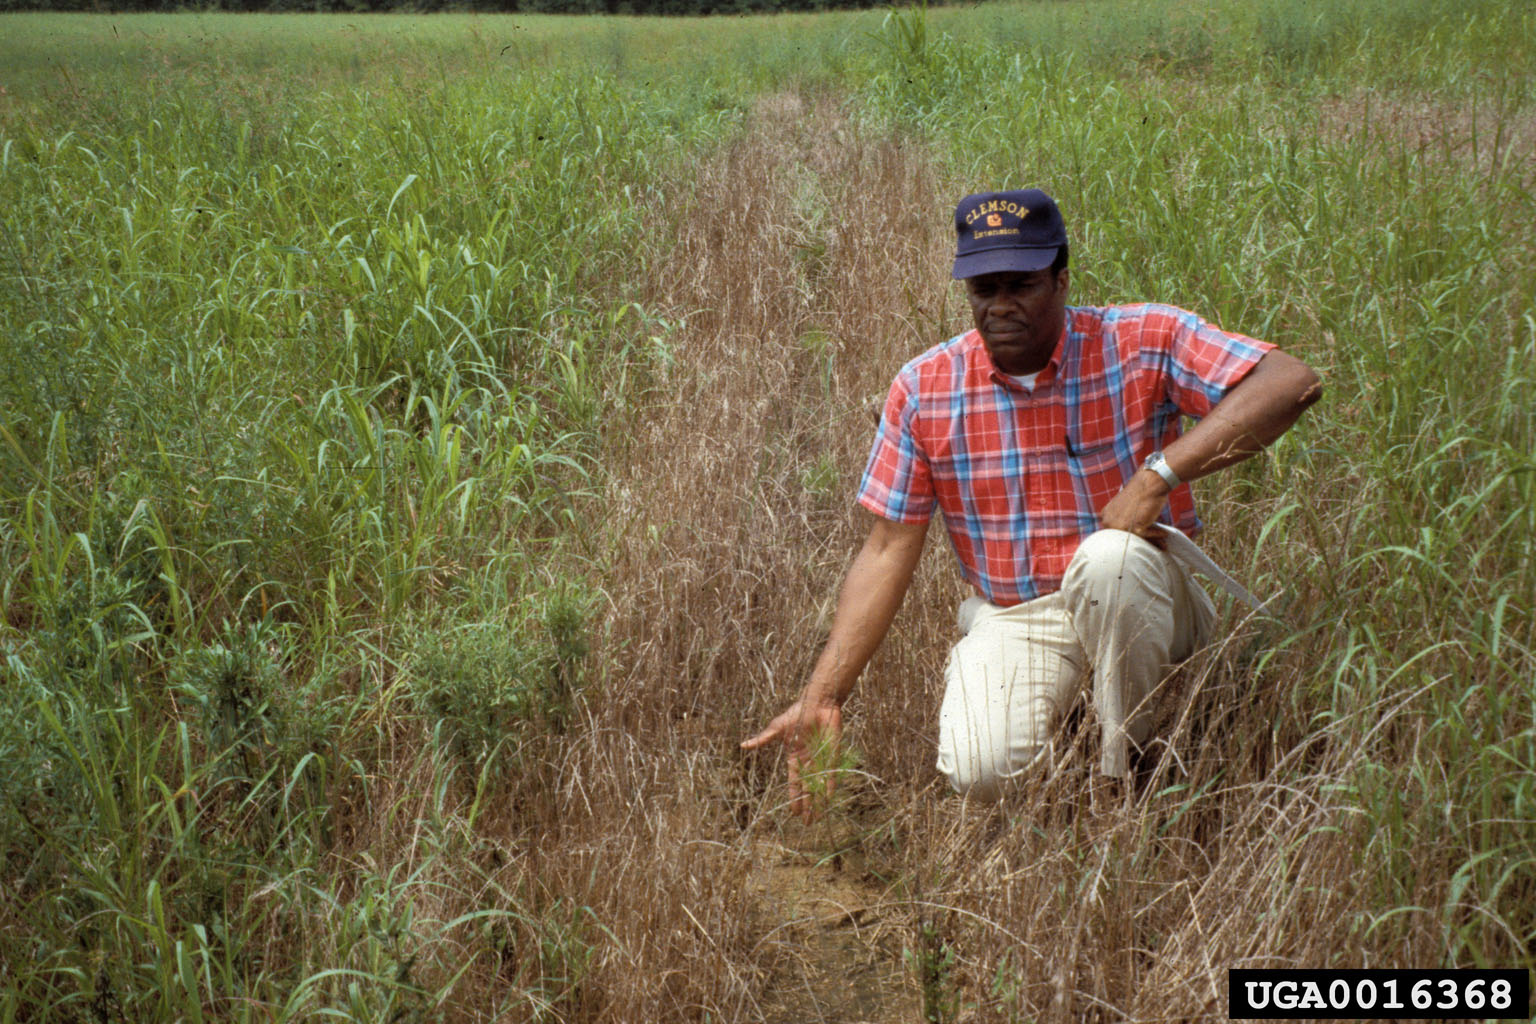 Photograph of a person kneeling down in a field of Johnsongrass. One section of the field appears to be dying, due to the use of herbicides.